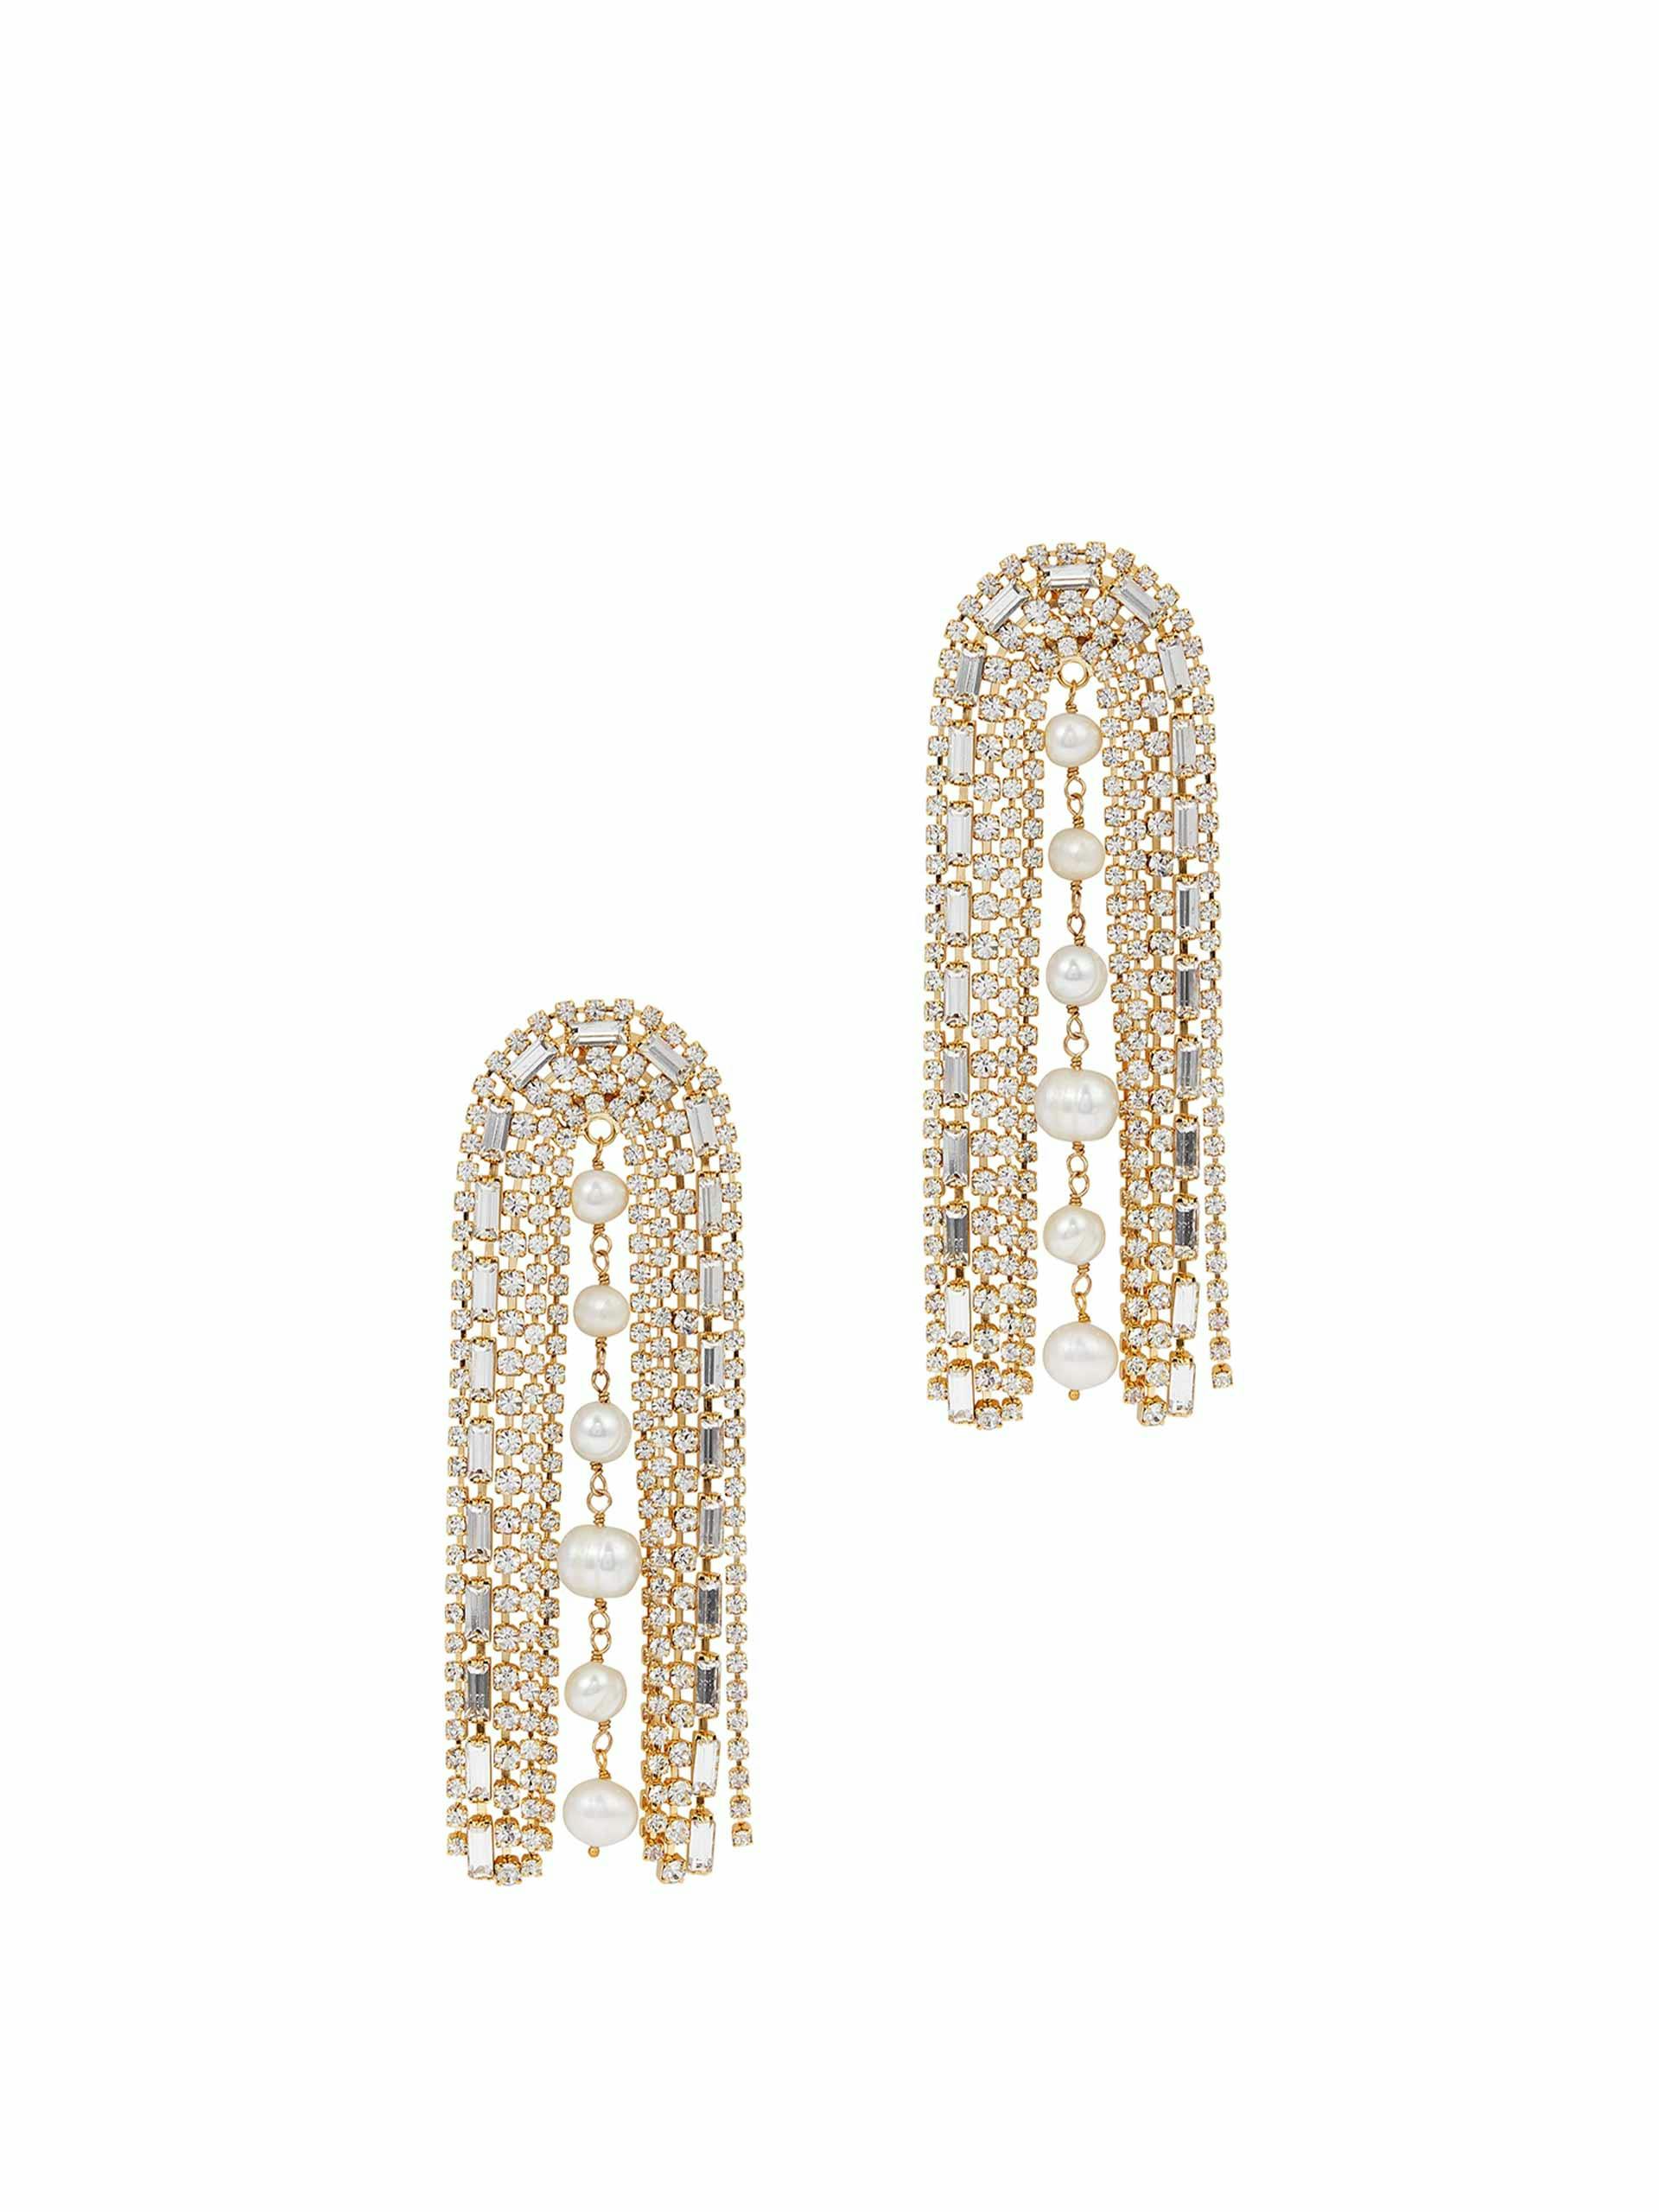 Earrings with pearls and crystals